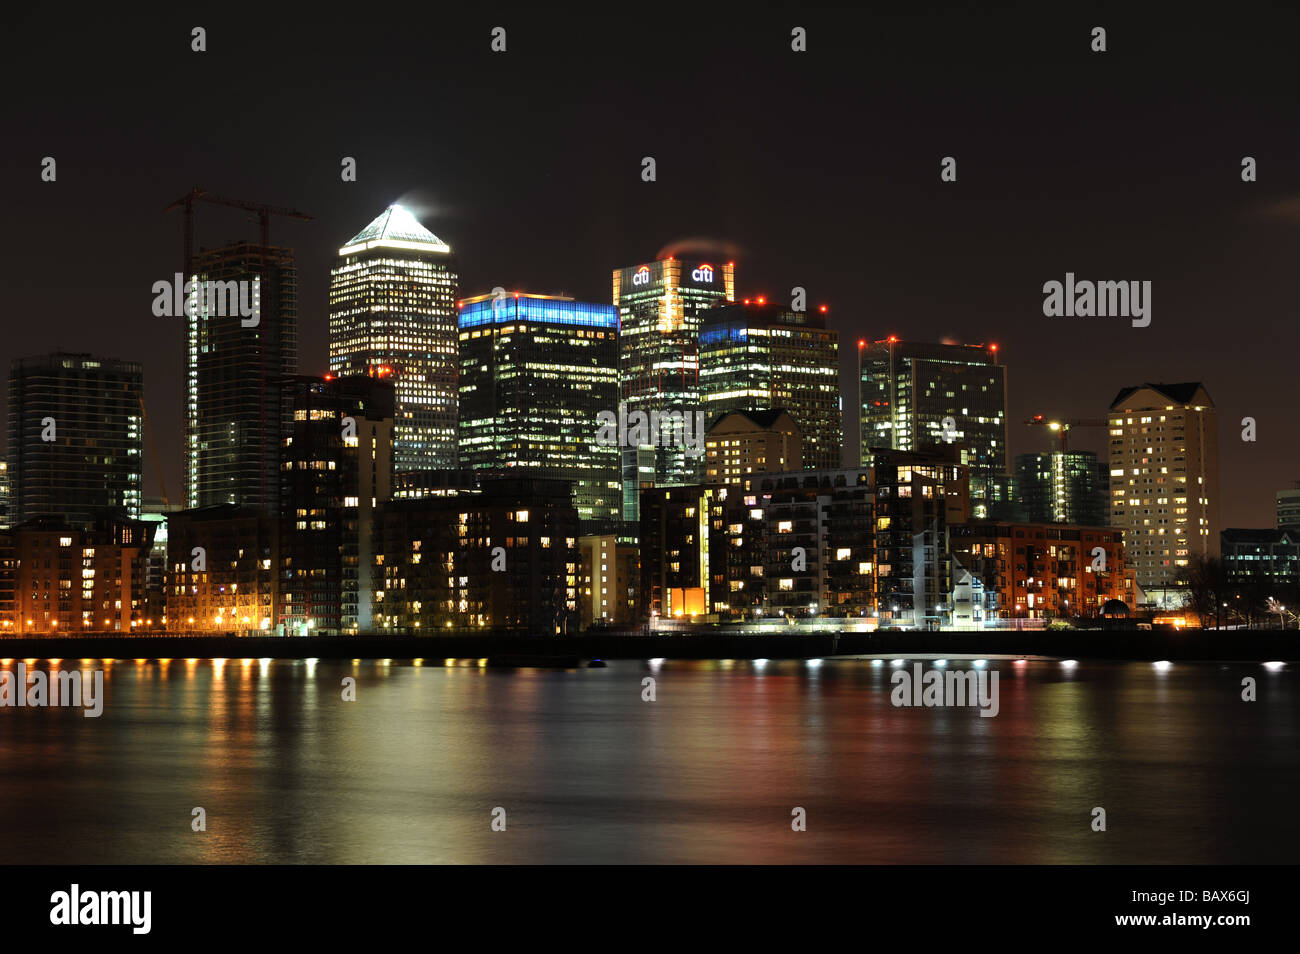 London's financial district including Canary Wharf, HSBC and Barclays taken at night. Stock Photo